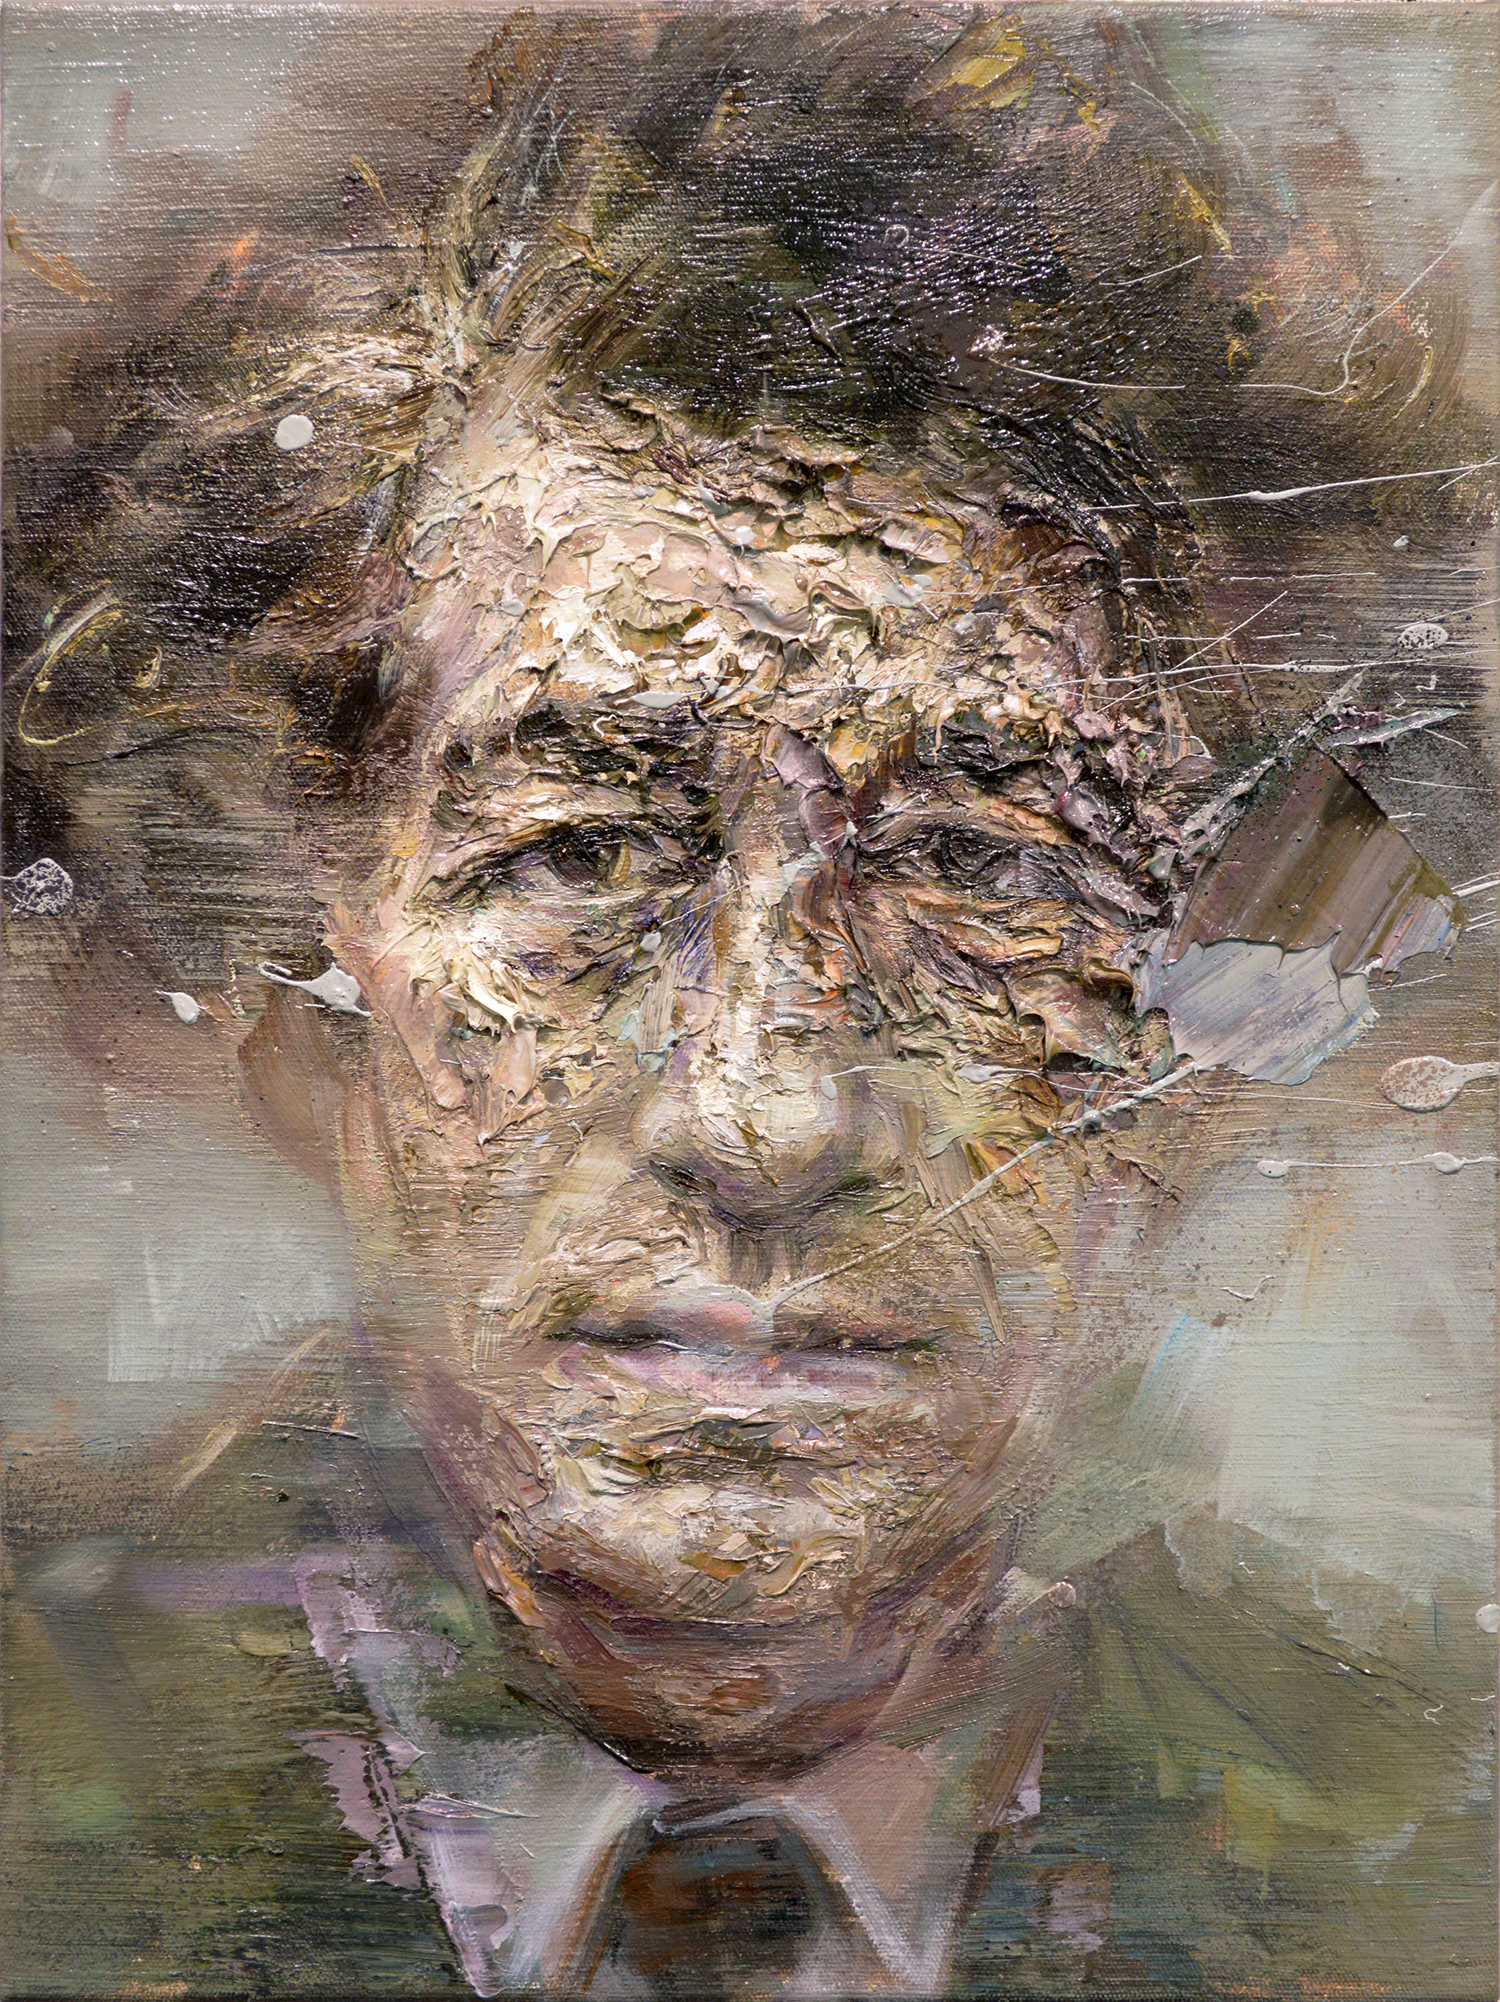 A portrait depicting the gaze of the ever relentless artist Alberto Giacometti